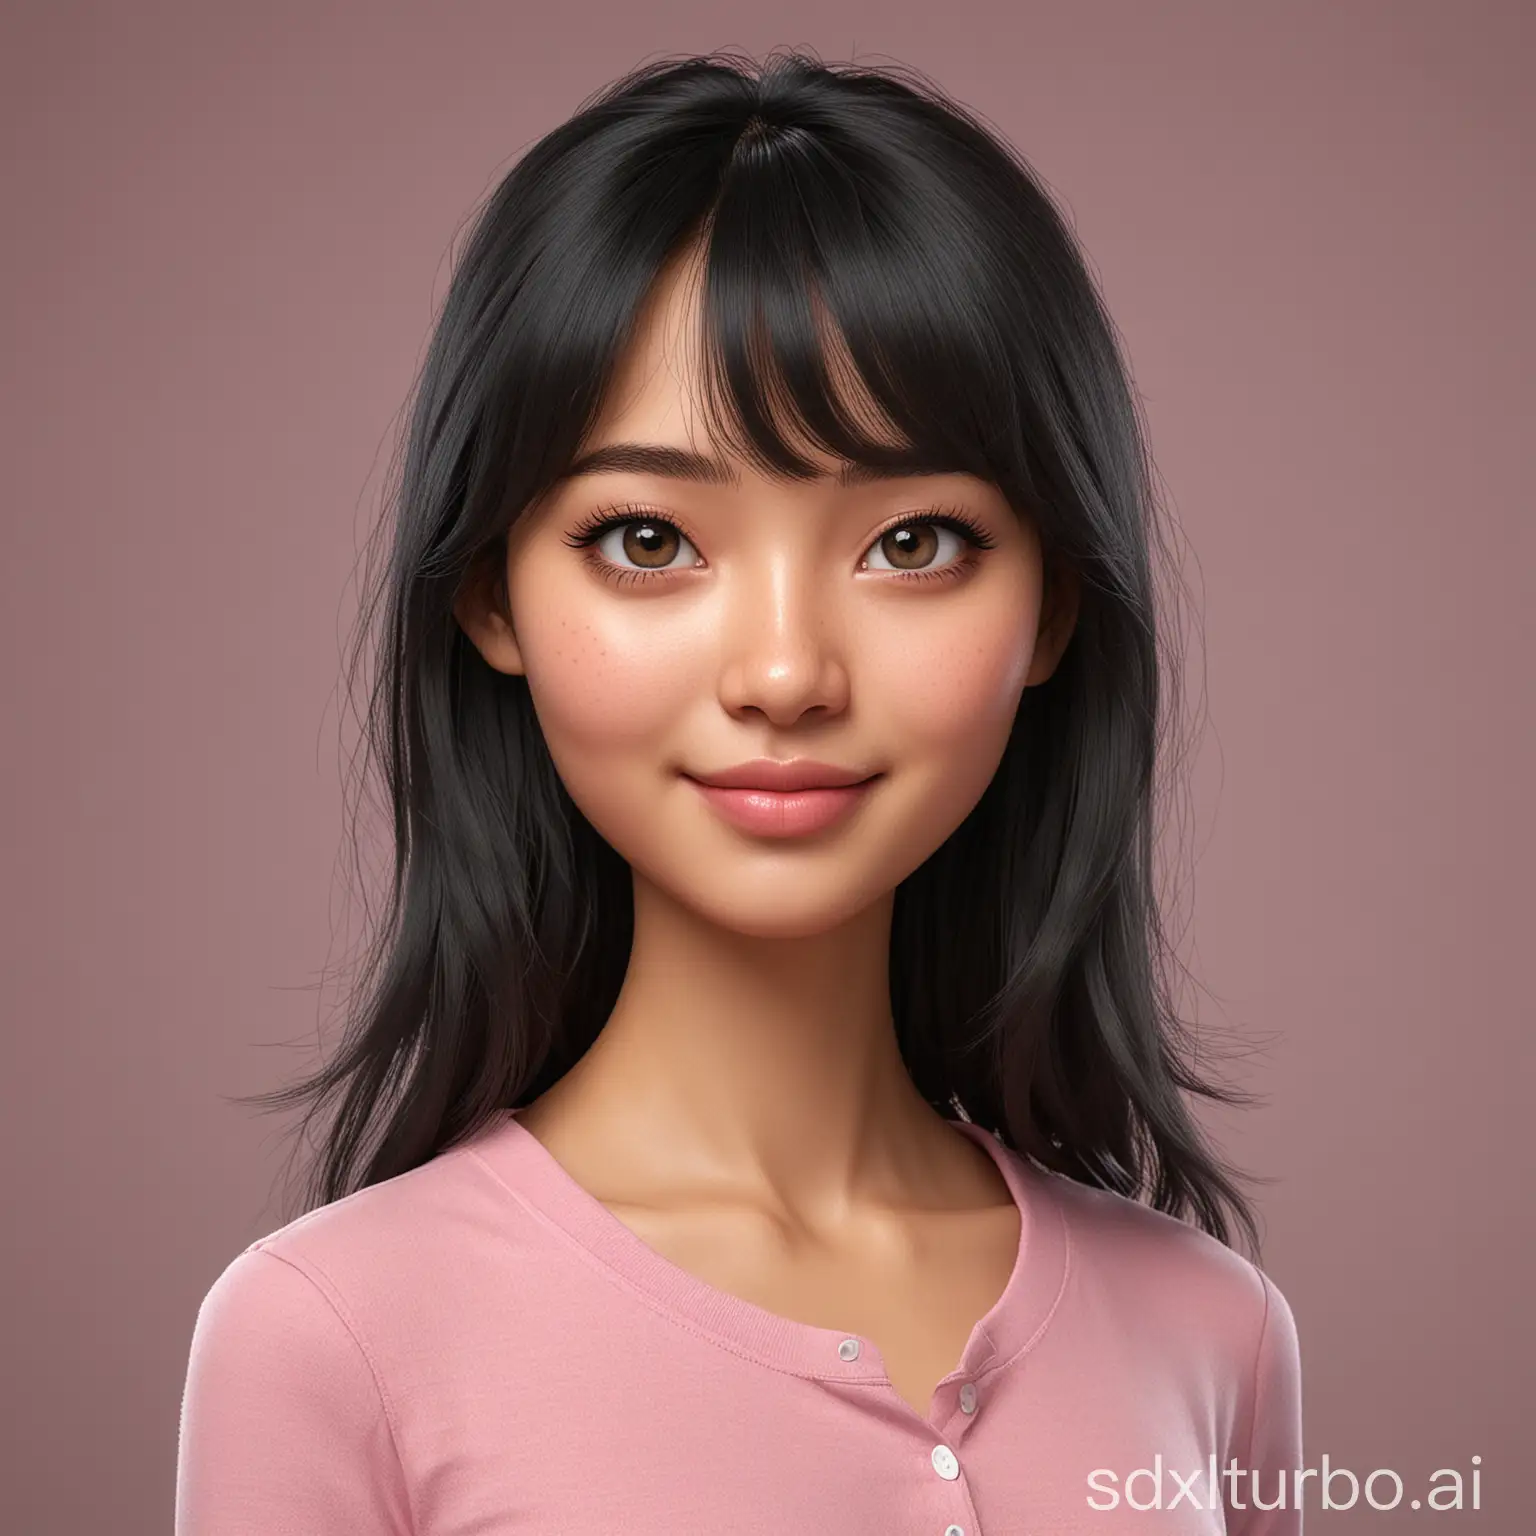 Beautiful-25YearOld-Indonesian-Woman-with-Long-Black-Hair-in-Pink-Shirt-3D-Cartoon-Style-Portrait